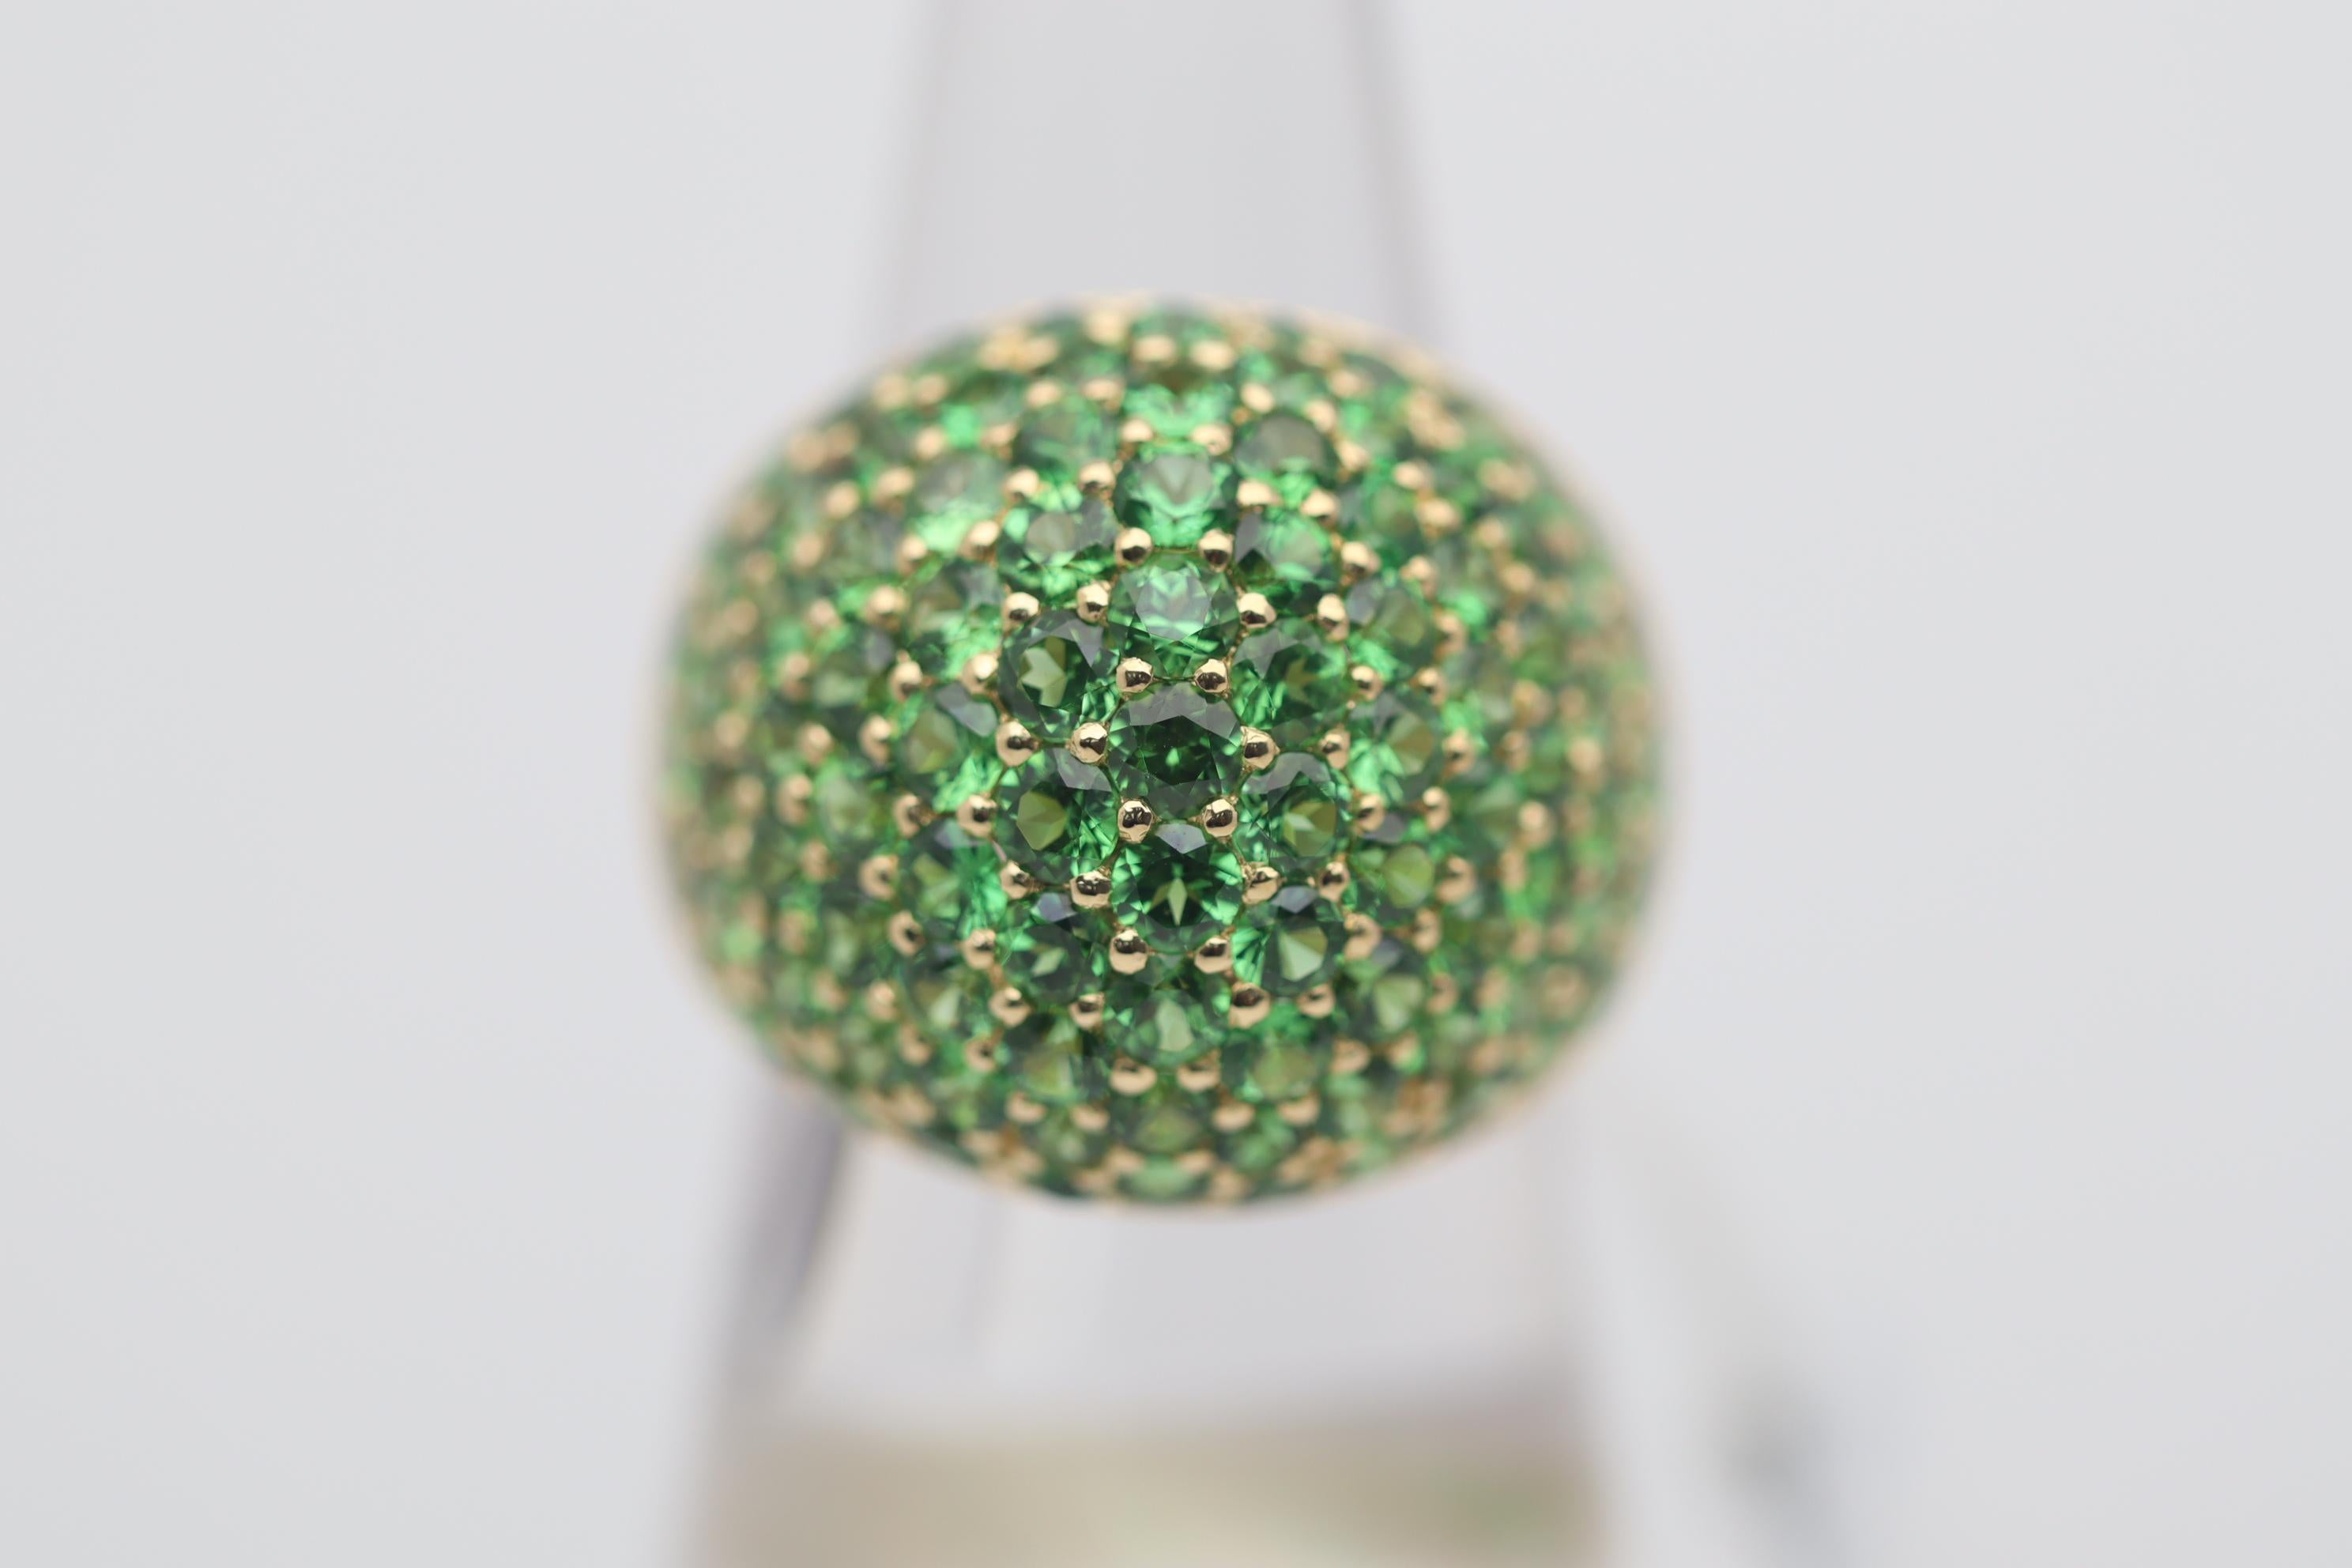 A well-sized dome style bombe ring featuring 8.09 carats of tsavorite garnets. They are pave-set around the ring and have an intense bright green color. Made in 18k yellow gold and ready to be worn.

Ring Size 7.50

Weight: 13.7 grams